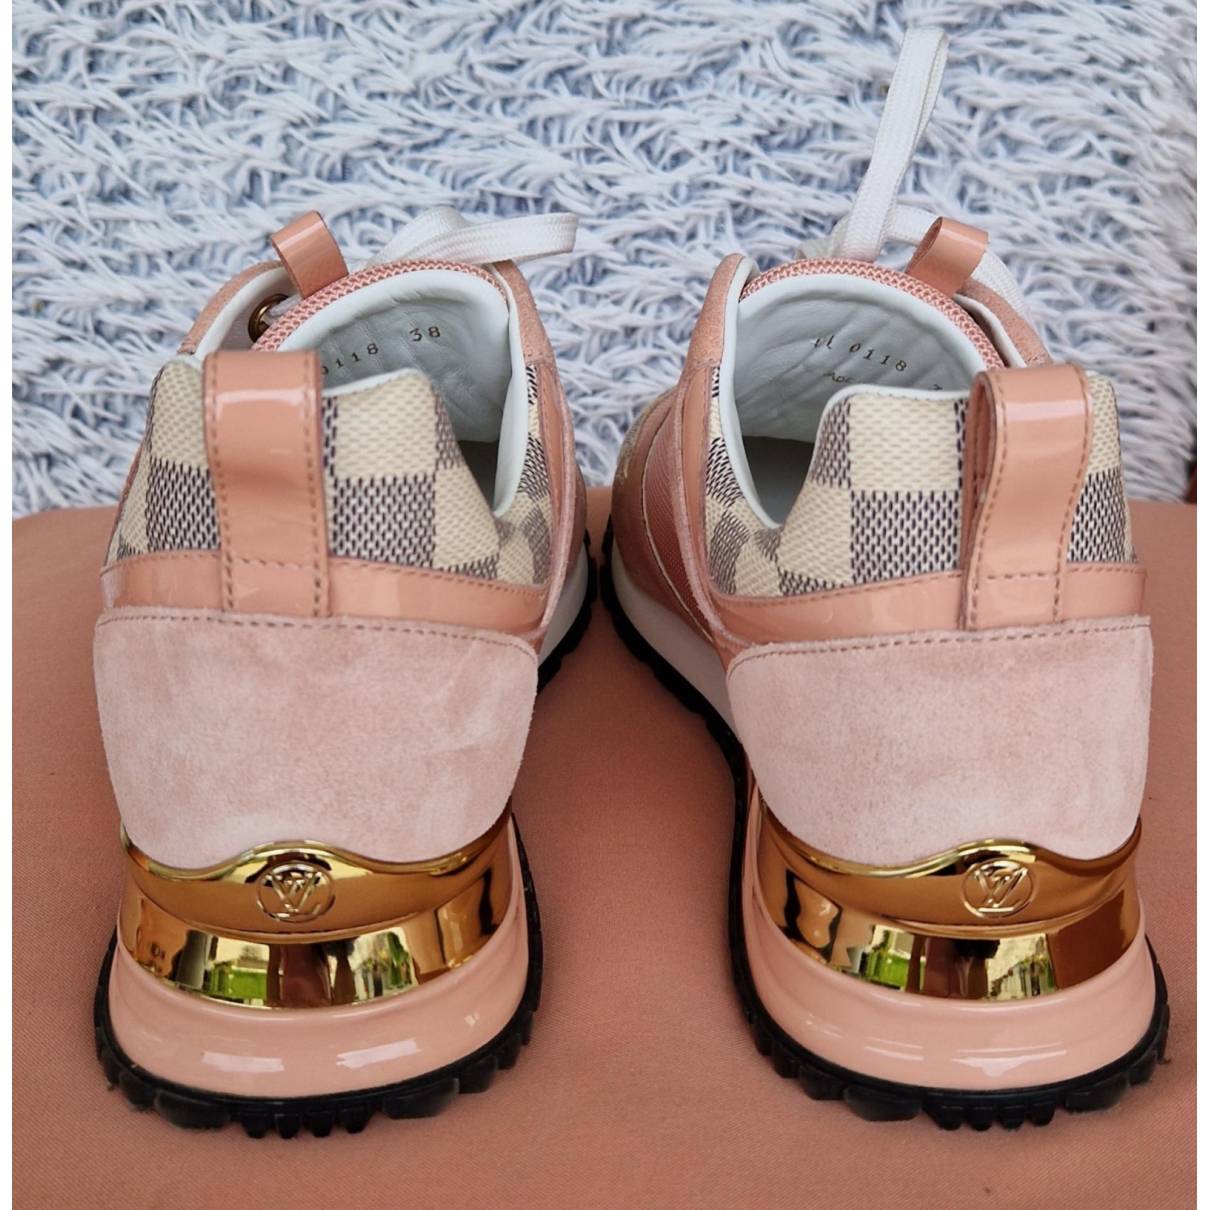 Run away leather trainers Louis Vuitton Pink size 38 EU in Leather